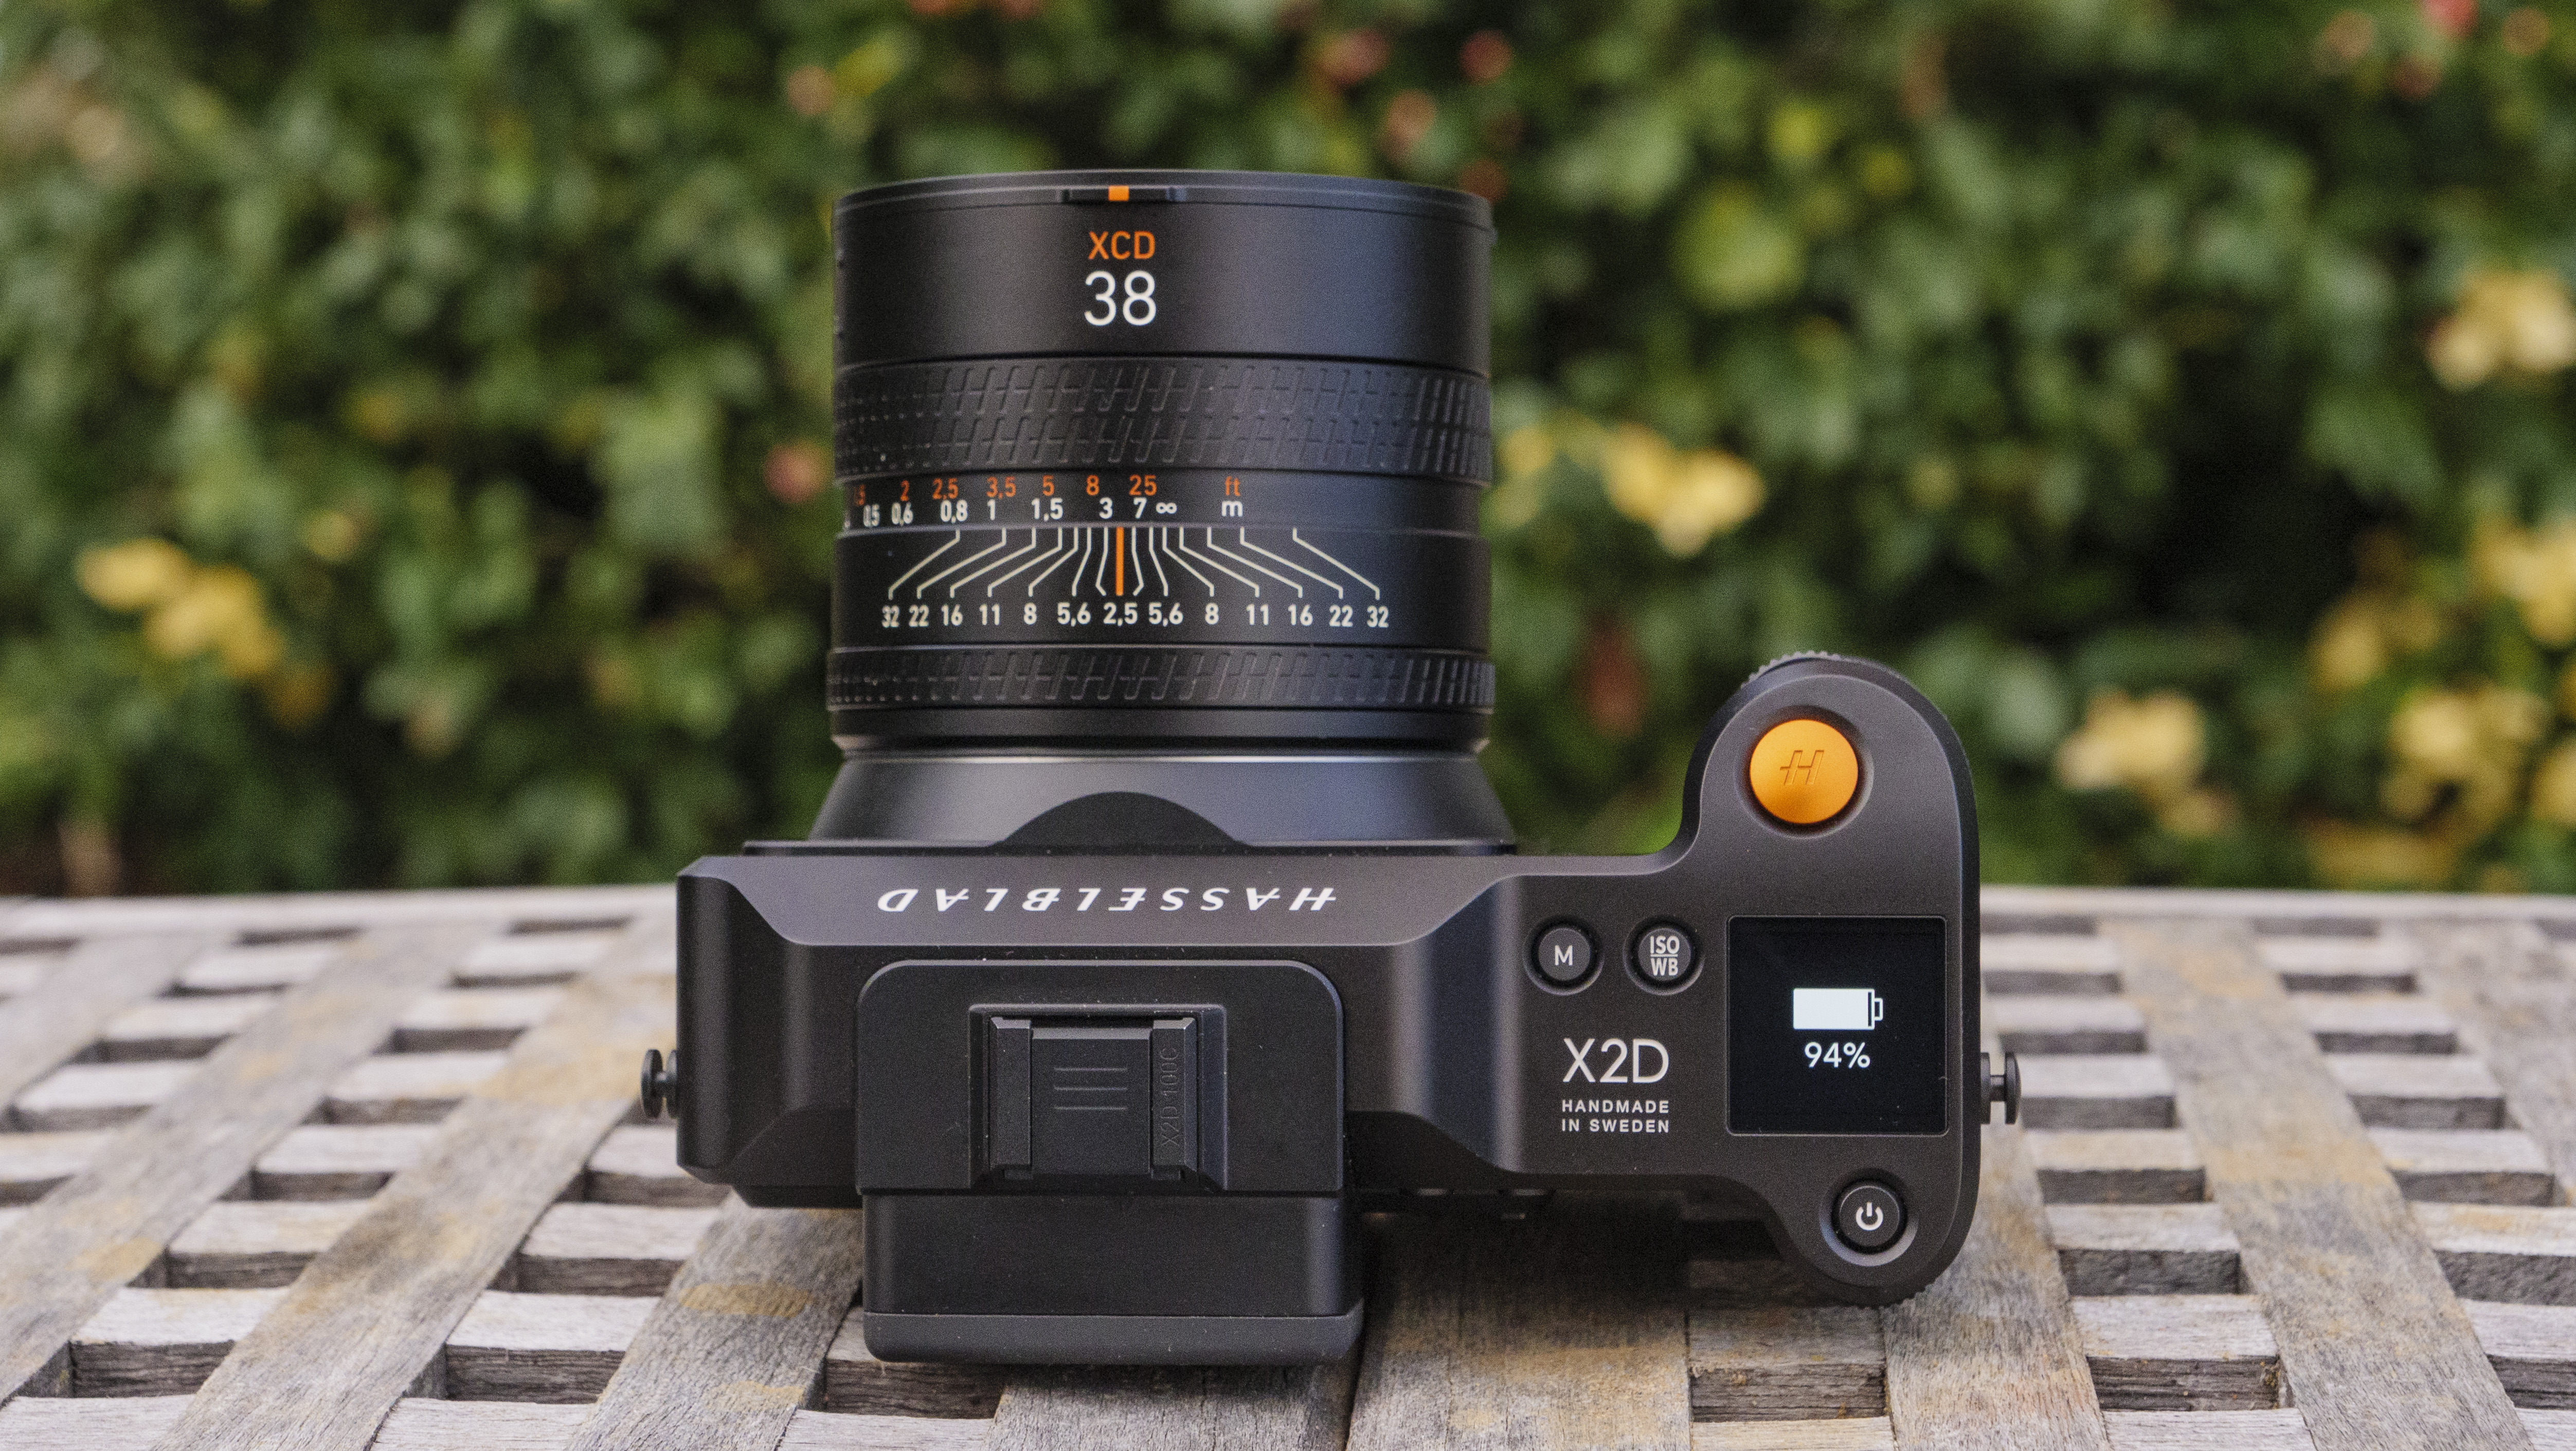 The Hasselblad X2D 100C camera from above showing top LCD screen and battery life